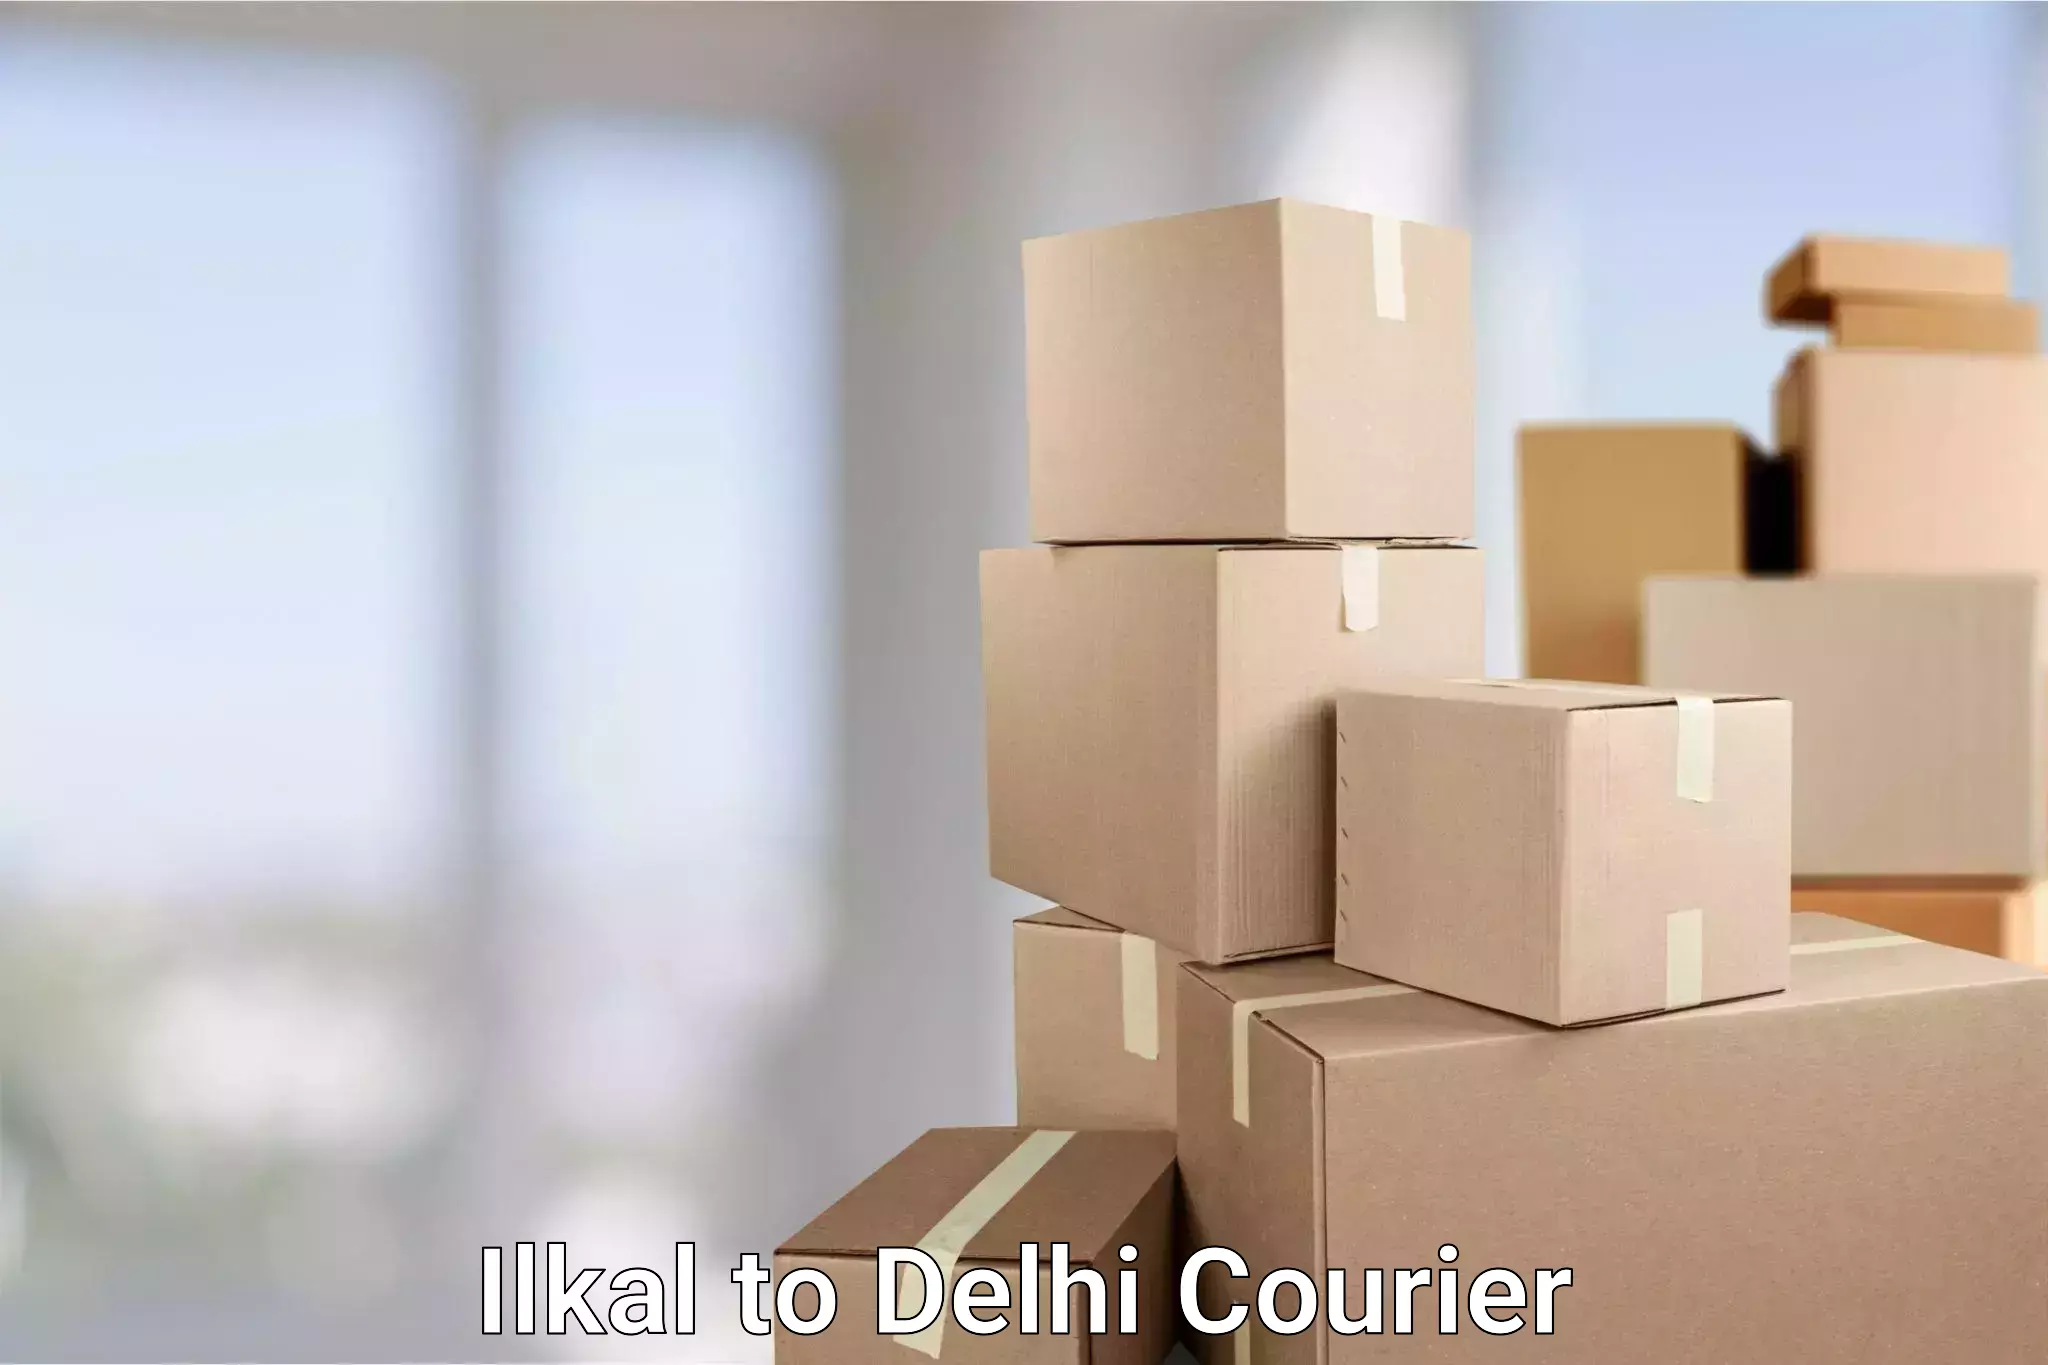 End-to-end delivery Ilkal to Delhi